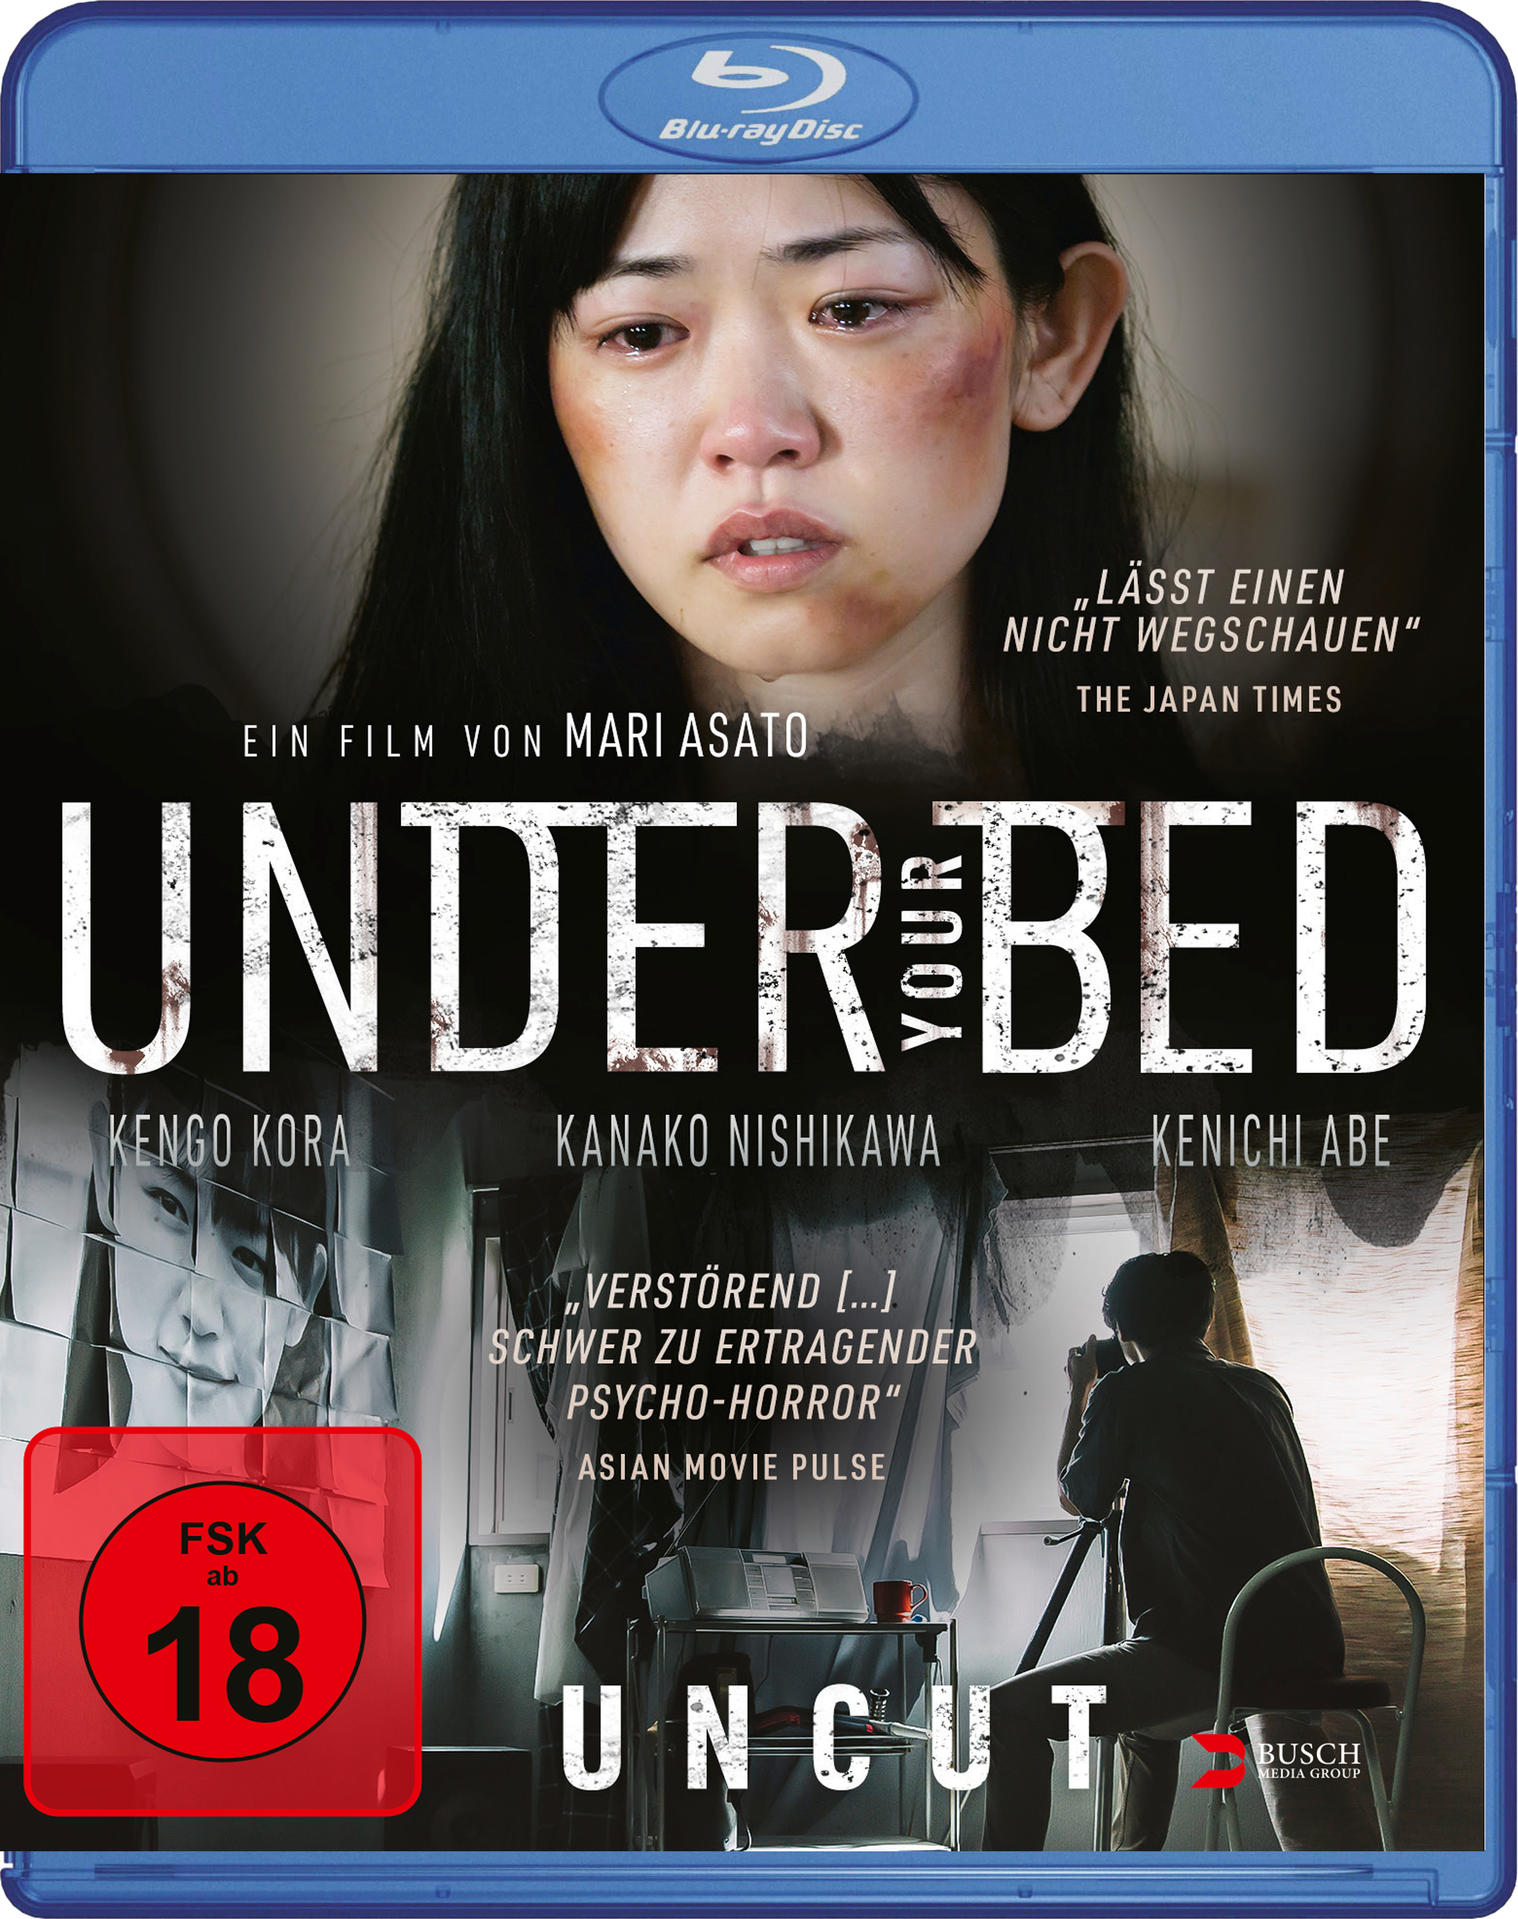 Blu-ray Under Bed Your